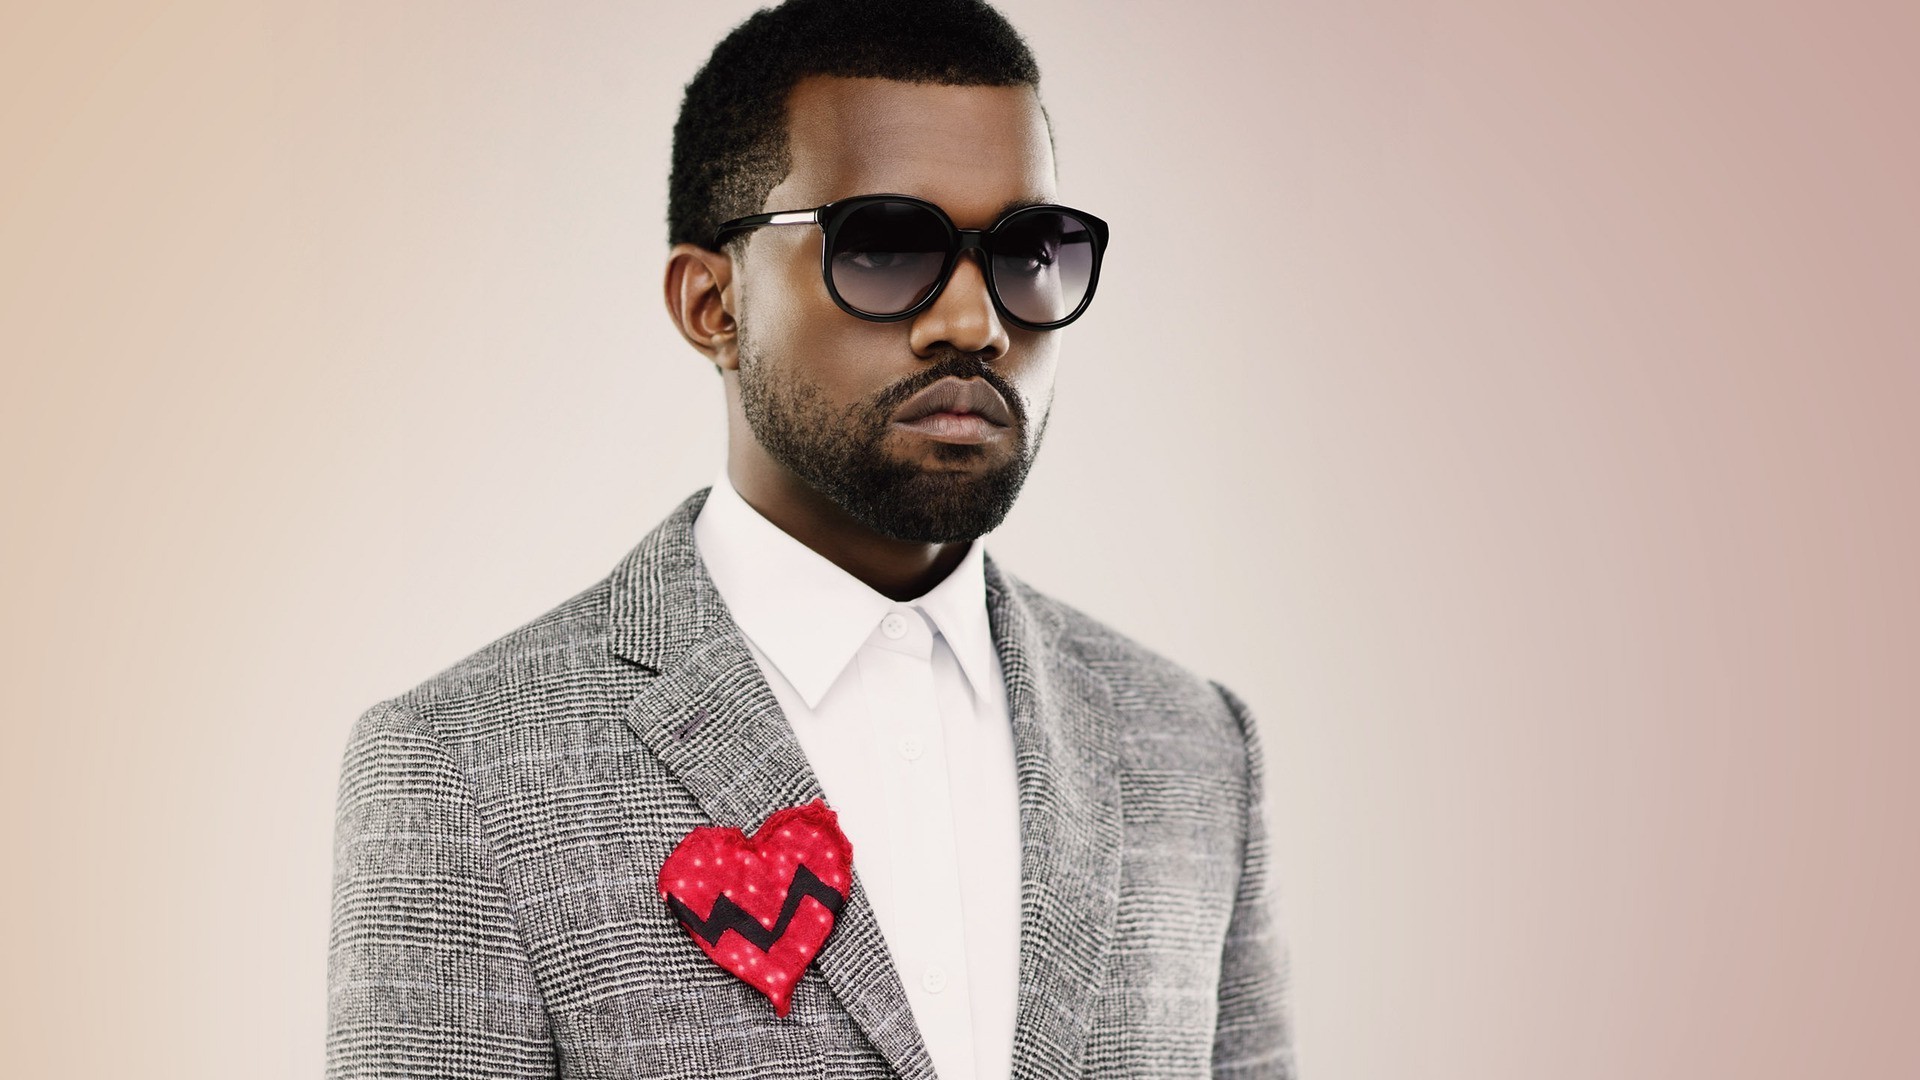 1920x1080 Kanye West Wallpaper - Wallpaper, High Definition, High Quality .